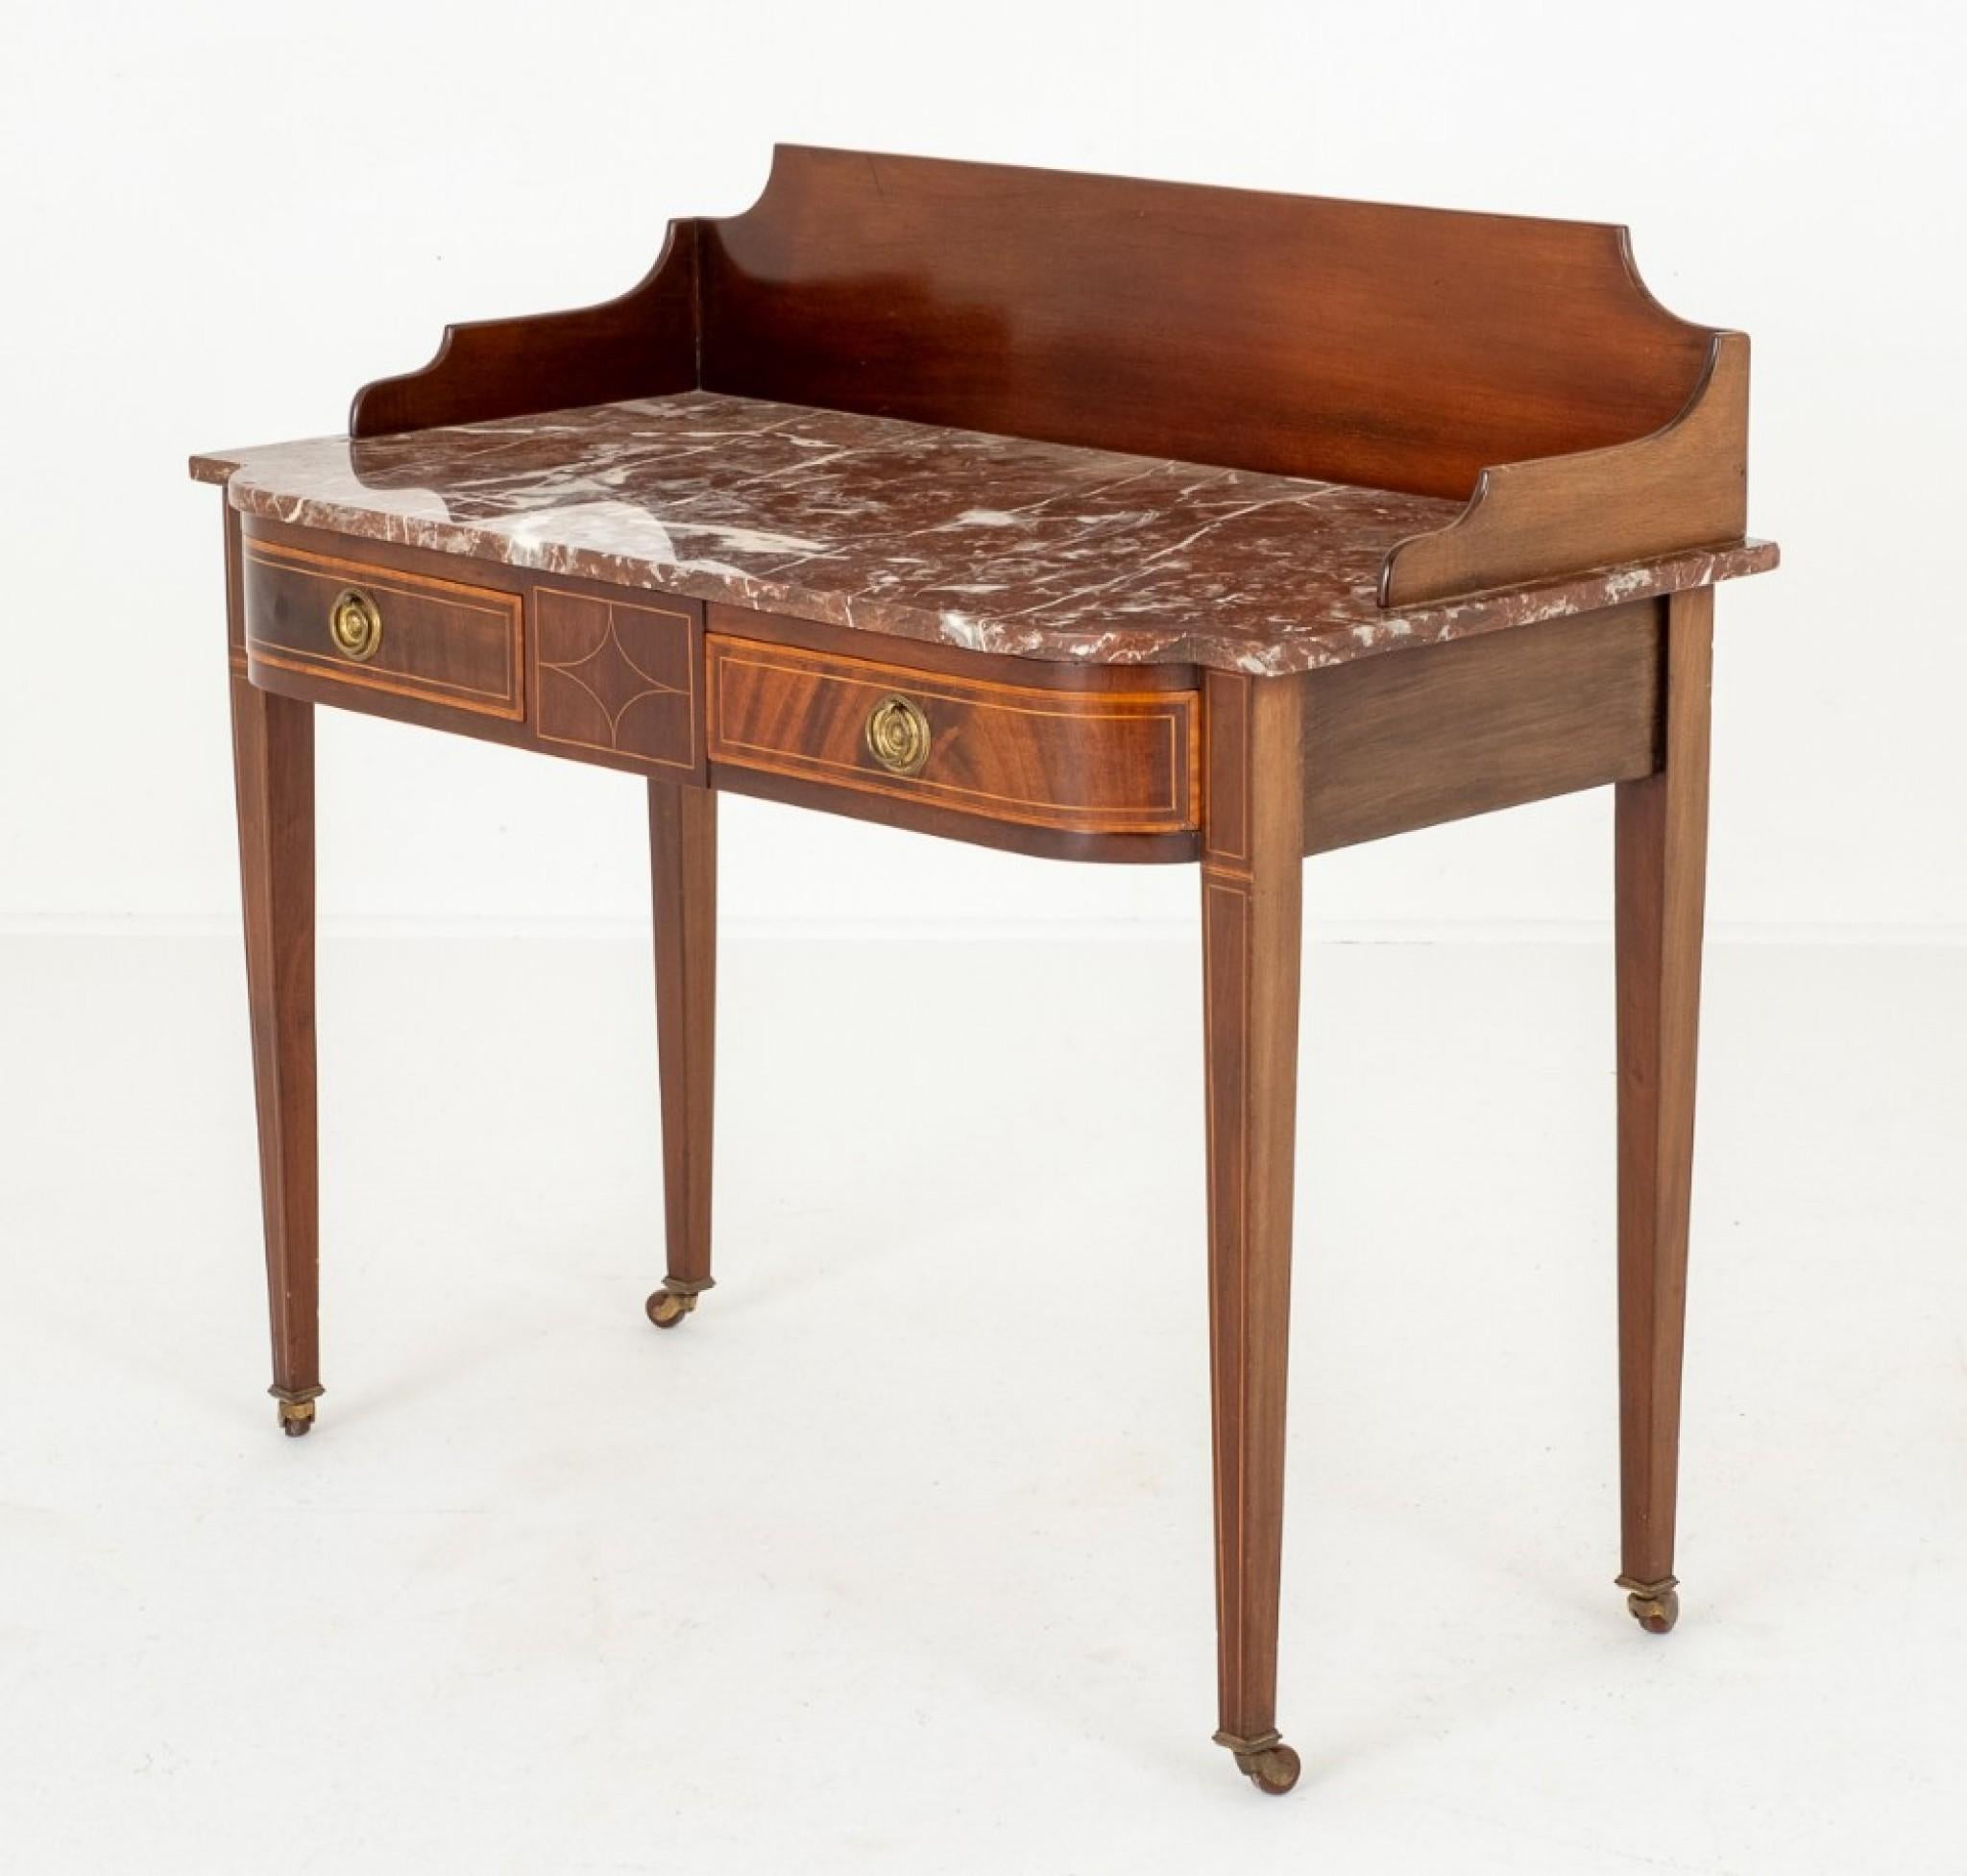 Sheraton Revival Mahogany Marble Top Side Table.
Circa 1890
Raised Upon Tapered Legs with Original Brass and Porcelain Castors.
The Shaped Front Features 2 x Oak Lined Drawers with Original Brass Ring Pull Handles.
The Legs and Drawers Feature